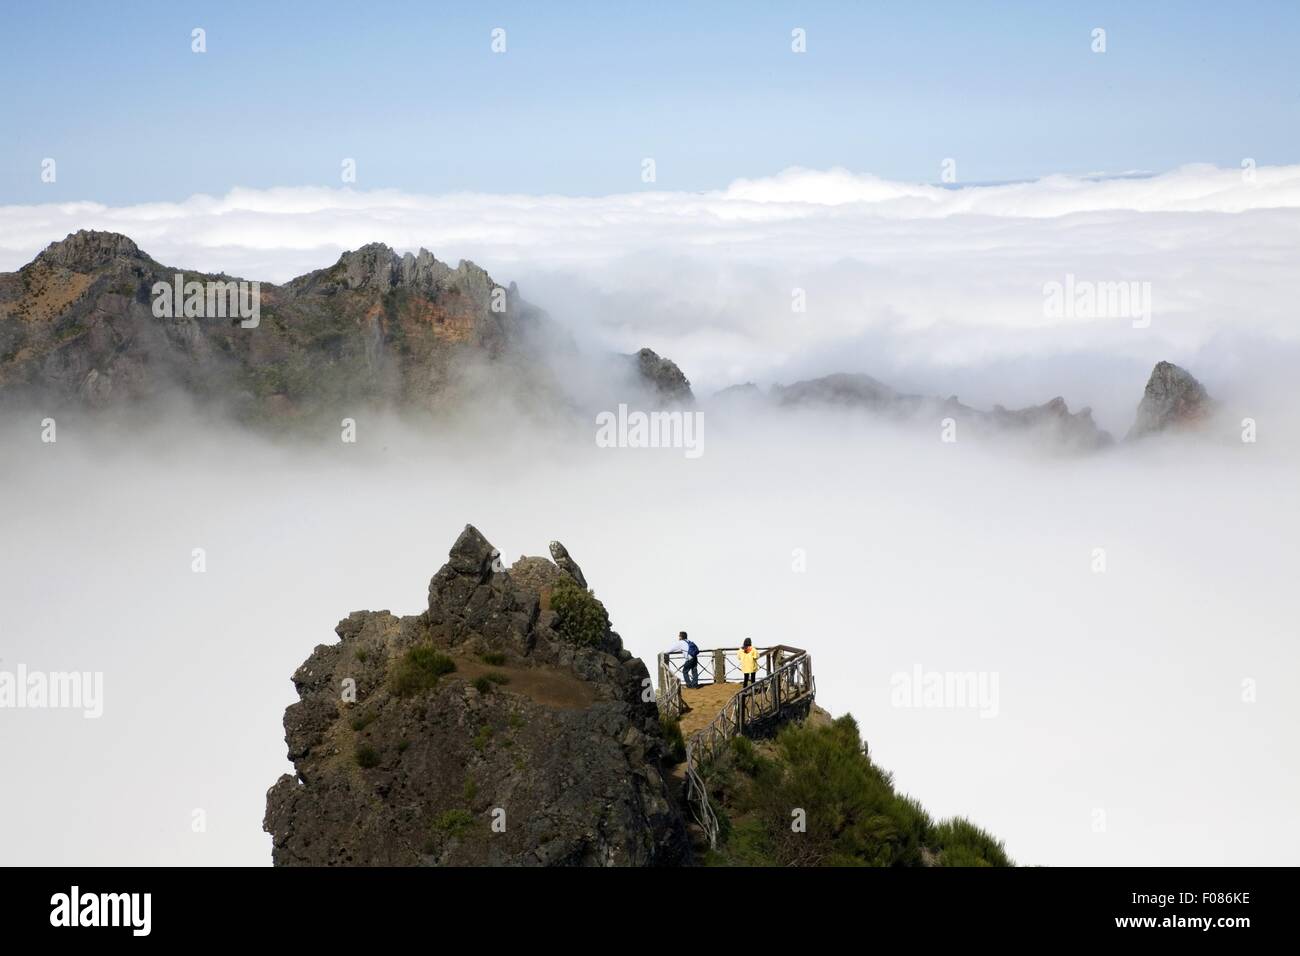 Vantage point on the mountain trail above the clouds, Madeira, Portugal Stock Photo